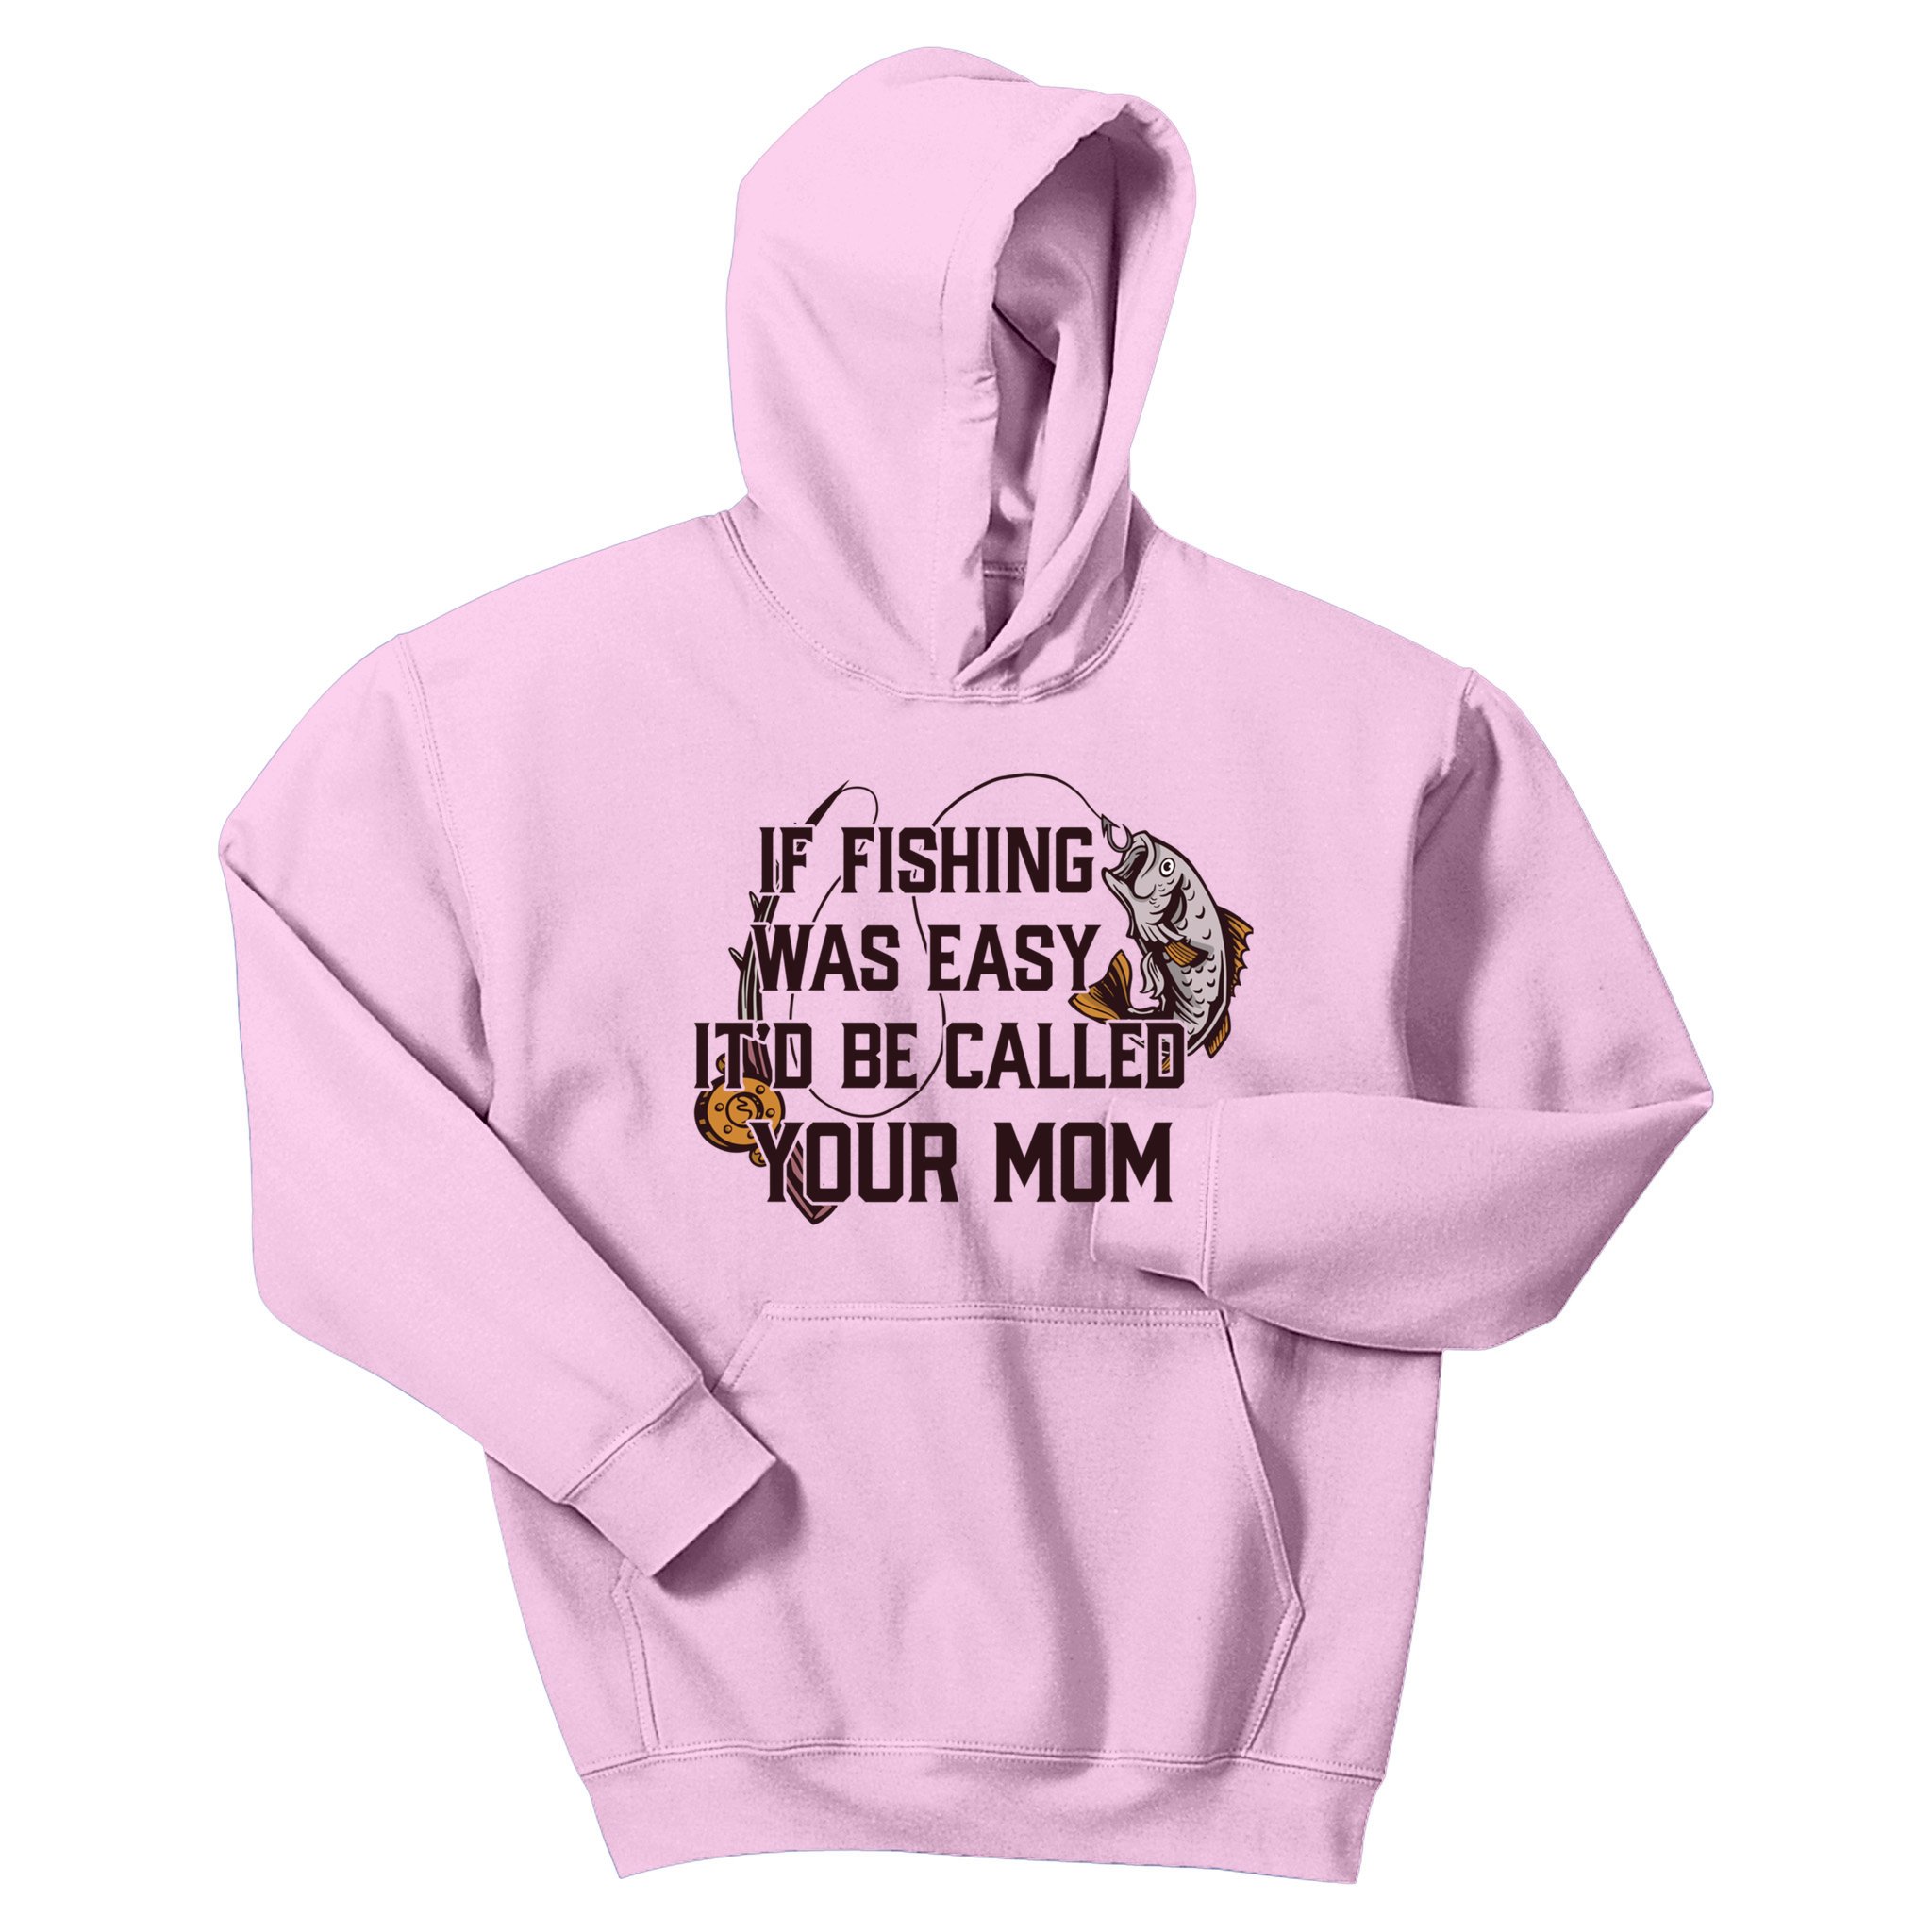 If Fishing Was Easy It'd Be Called Your Mom Funny Fish Meme Gift Kids Hoodie